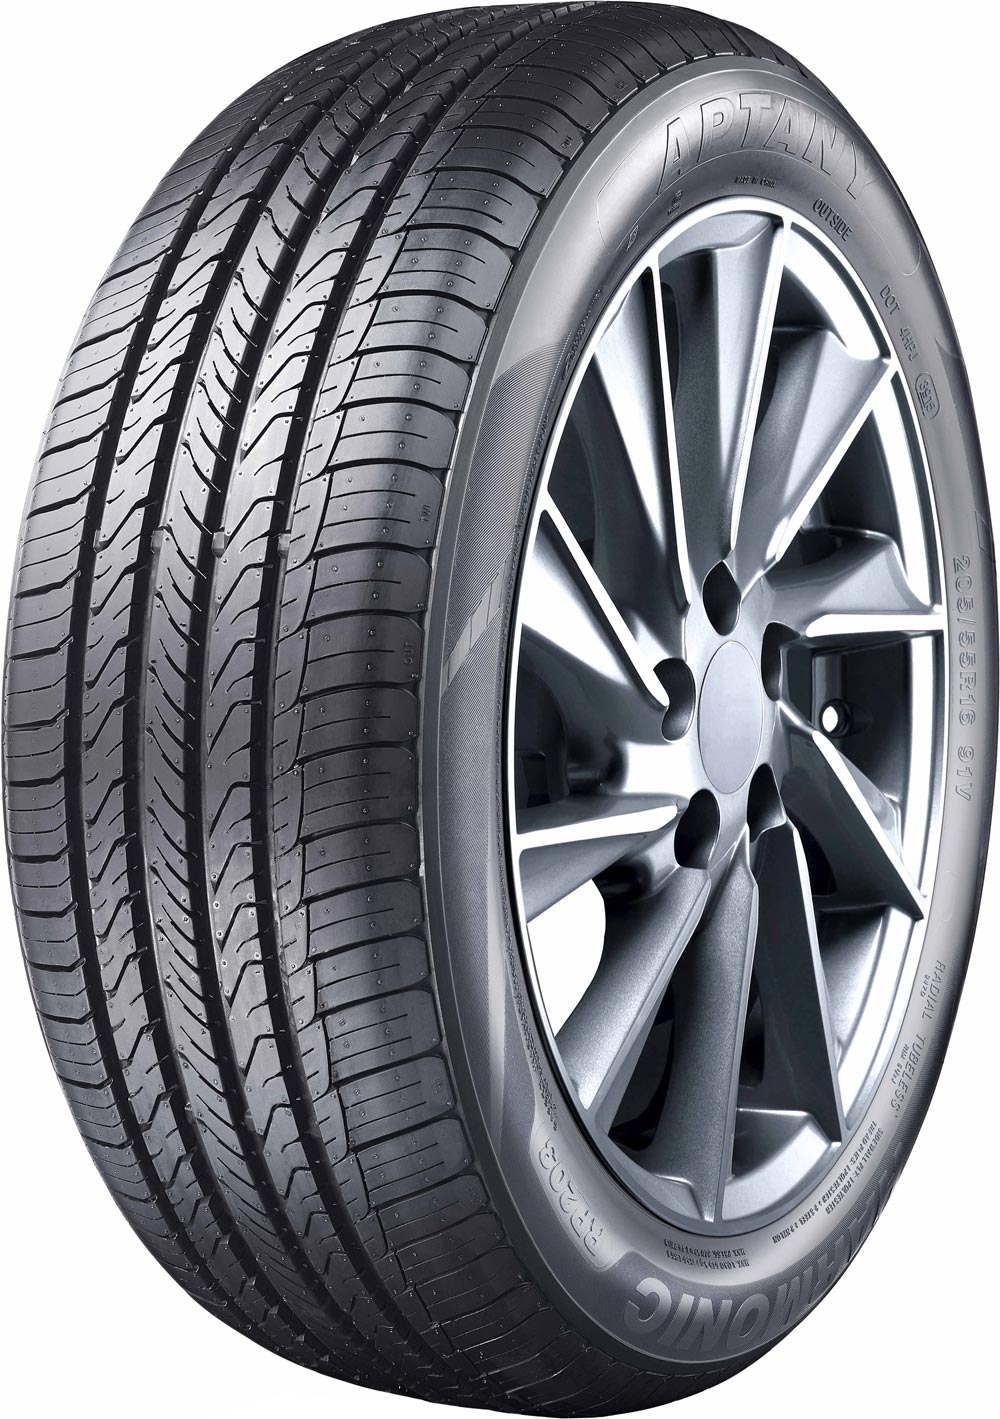 Anvelope auto Aptany RP203 DOT 2017 165/65 R15 81T